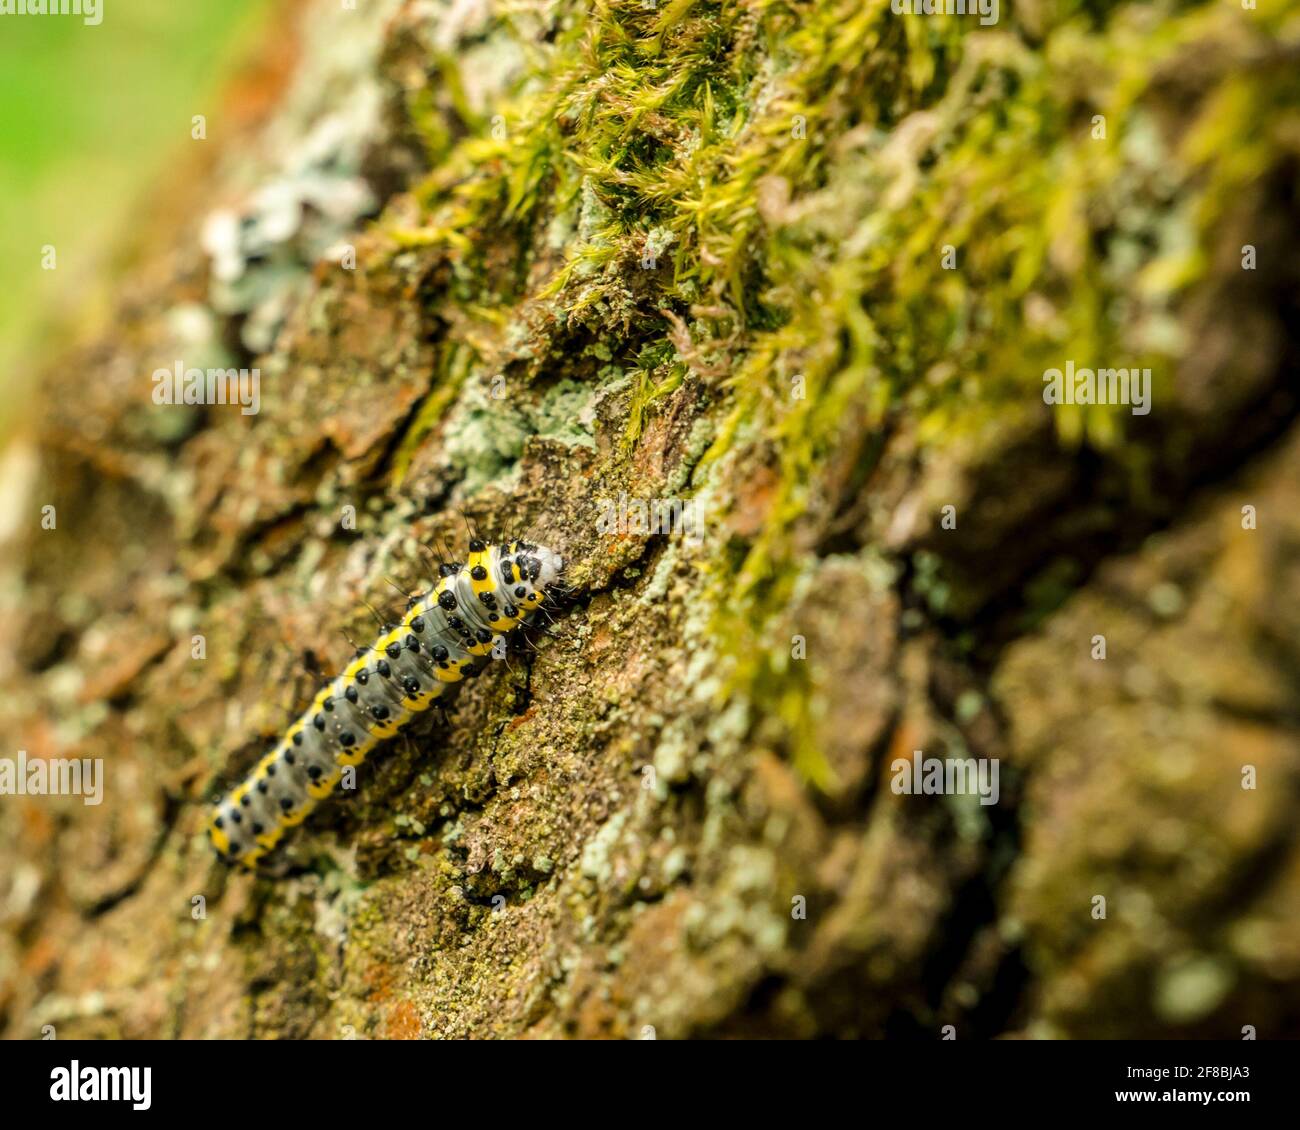 Caterpillar with black dots and yellow stripes. Toadflax/Brocade Moth (Calophasia lunula) Stock Photo